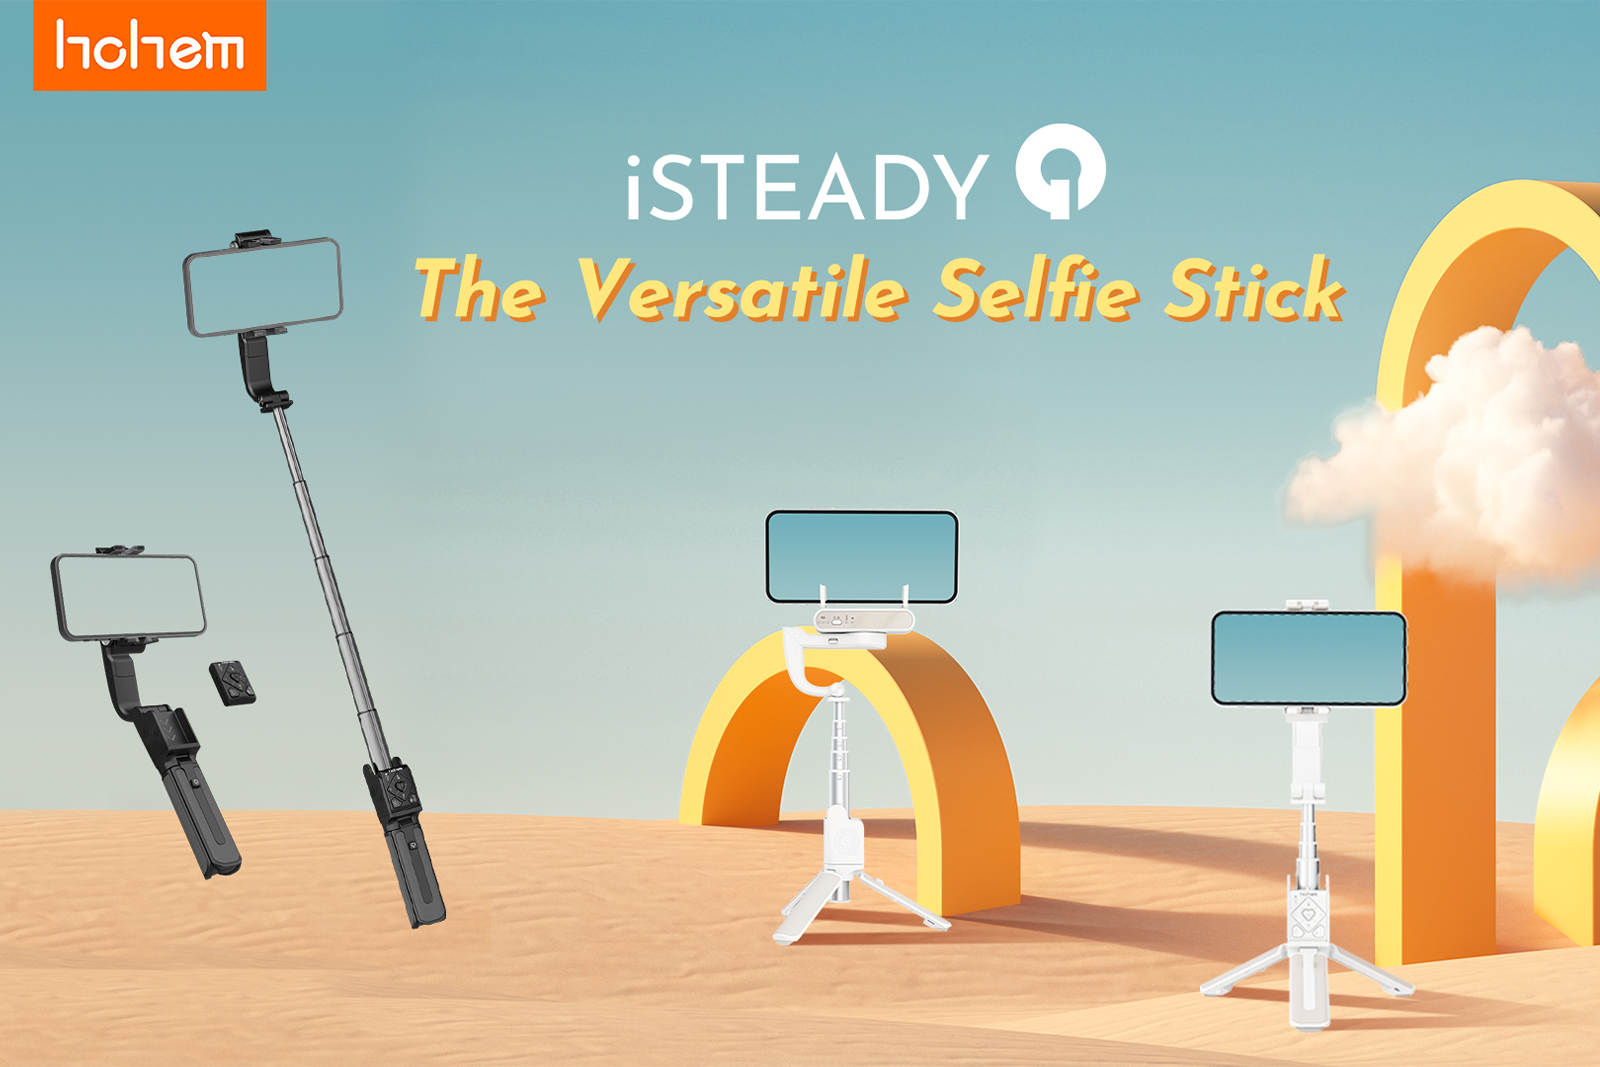 Combine the features of a selfie stick, tripod, and gimbal with Hohem iSteady Q photo 2